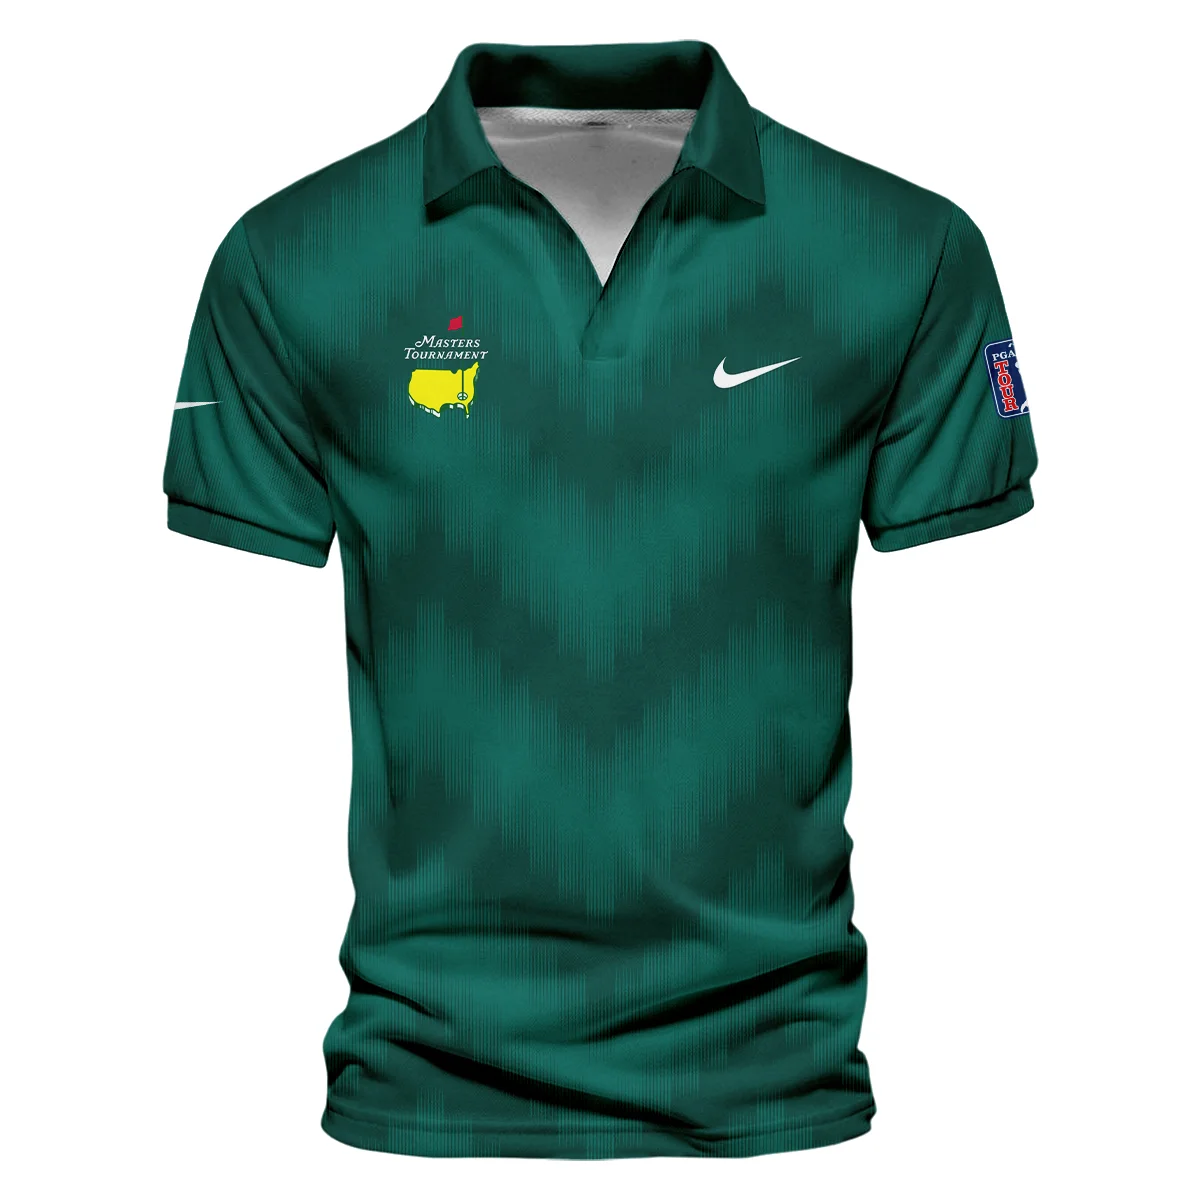 Golf Sport Green Gradient Stripes Pattern Nike Masters Tournament Style Classic, Short Sleeve Polo Shirts Quarter-Zip Casual Slim Fit Mock Neck Basic